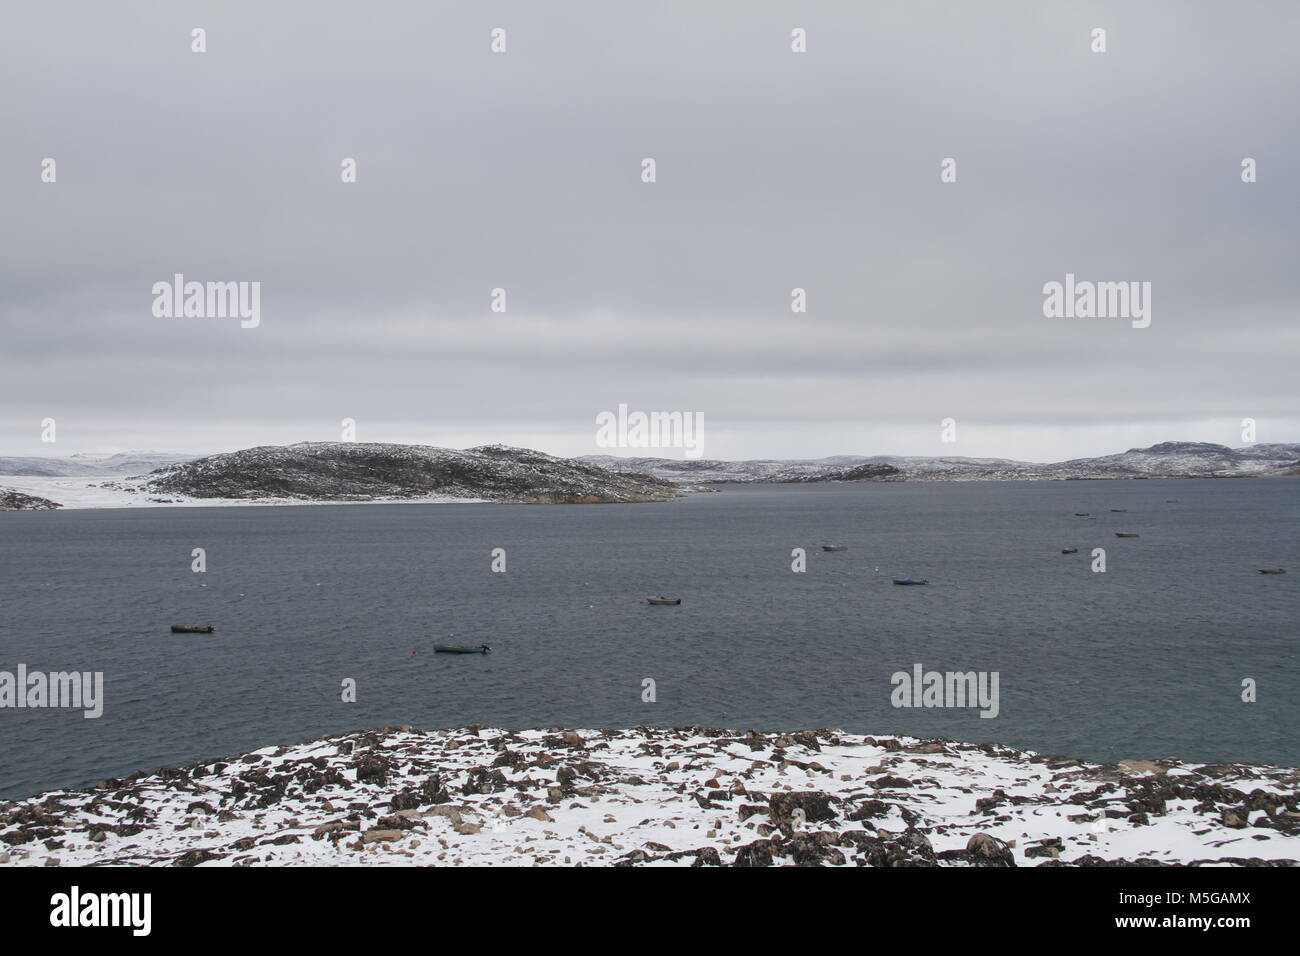 View of Cape Dorset (Kinngait) Nunavut with a view of the ocean and boats, a northern Inuit community in arctic Canada Stock Photo